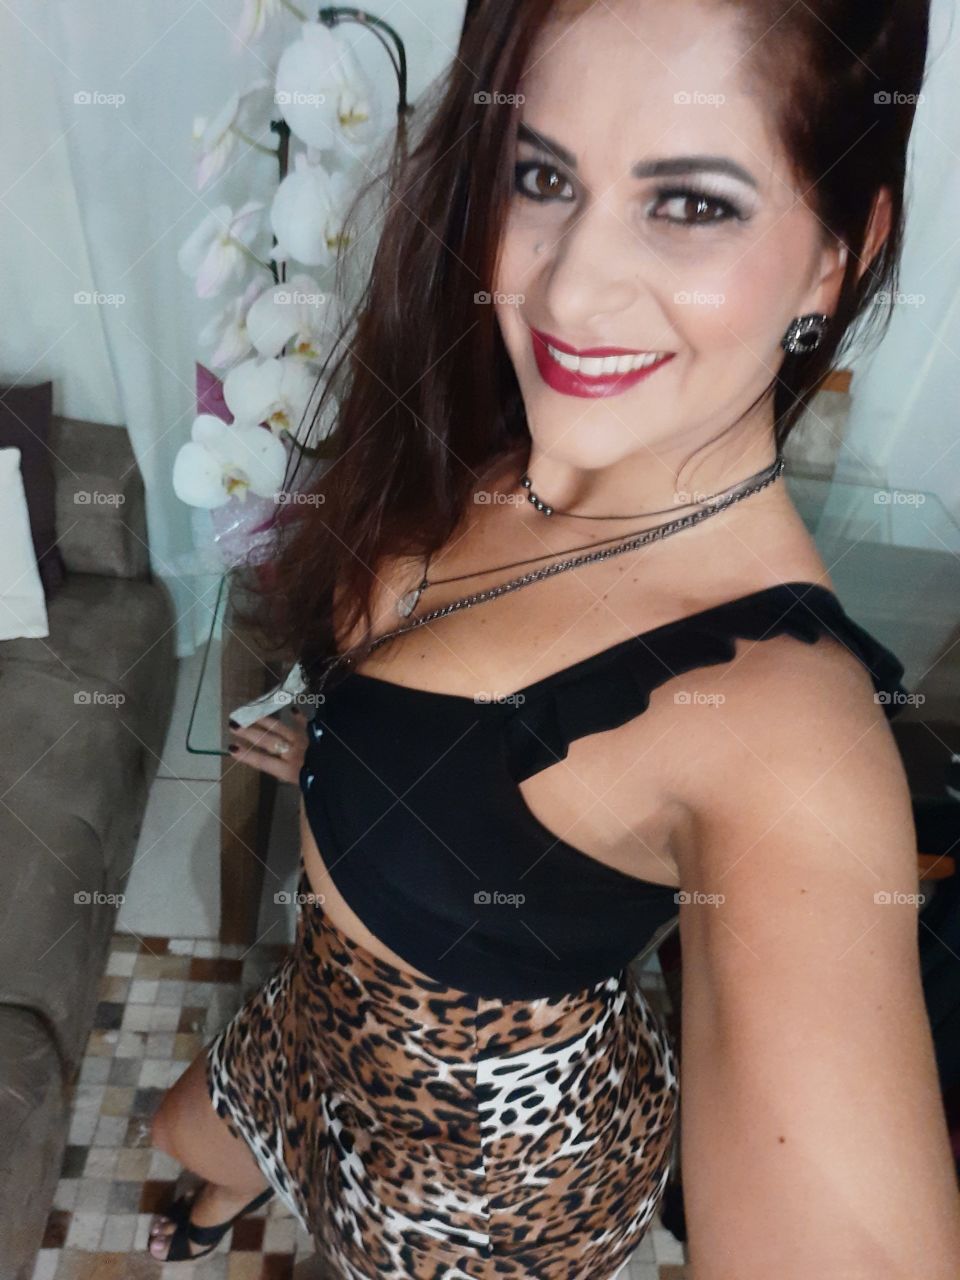 smiling and happy woman in animal print clothes